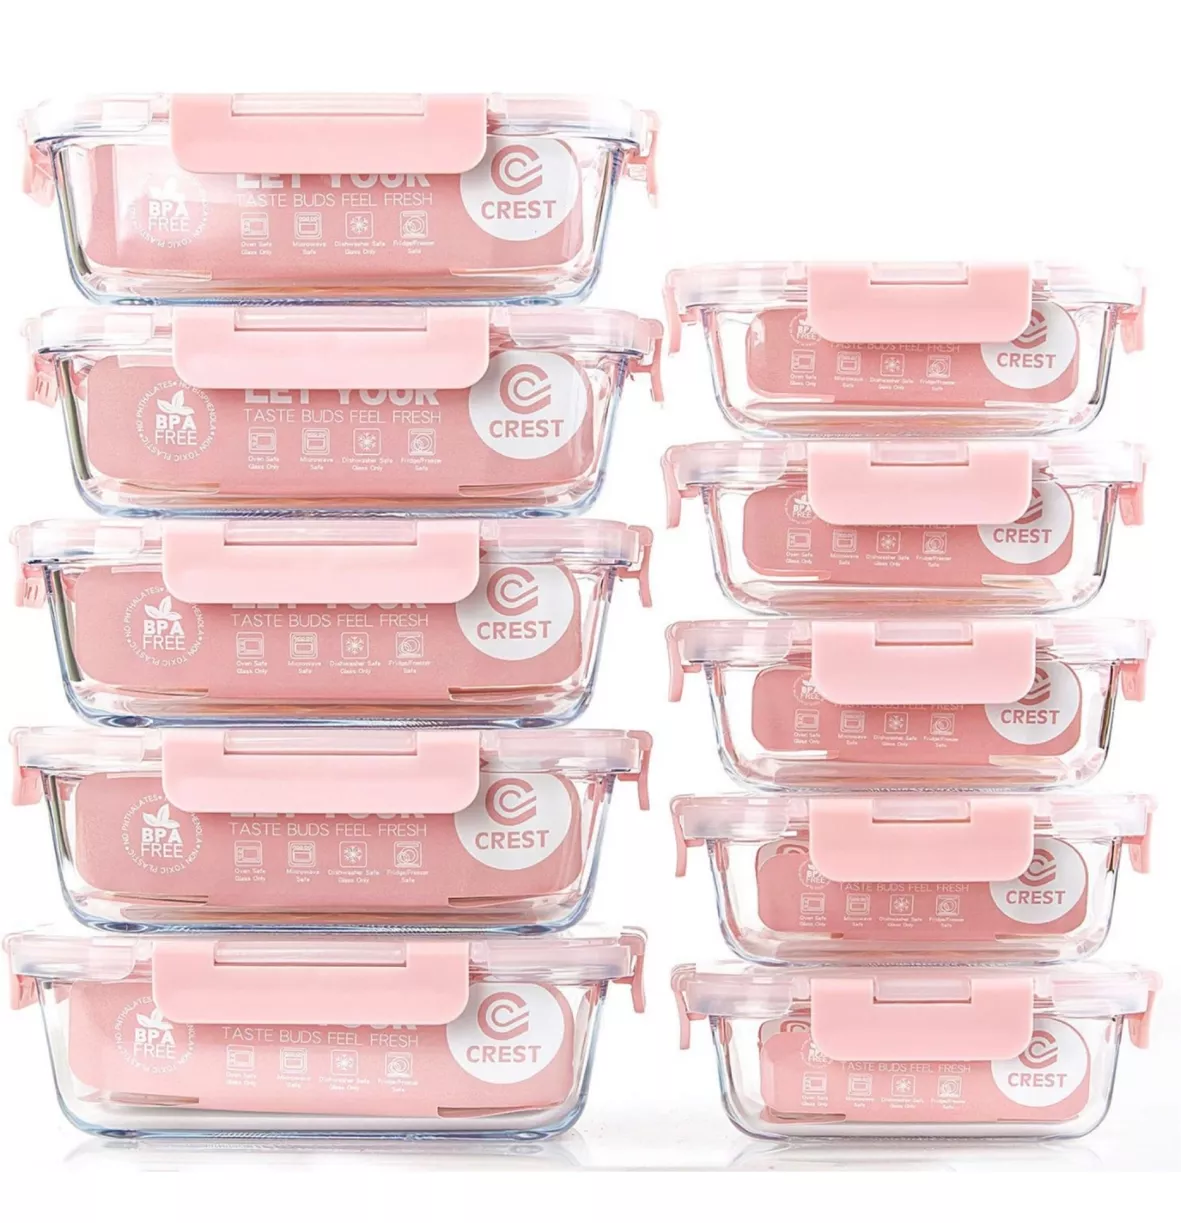 KOMUEE 10-Pack 30 oz Glass Meal Prep Containers - Microwave, and Dishwasher  Safe